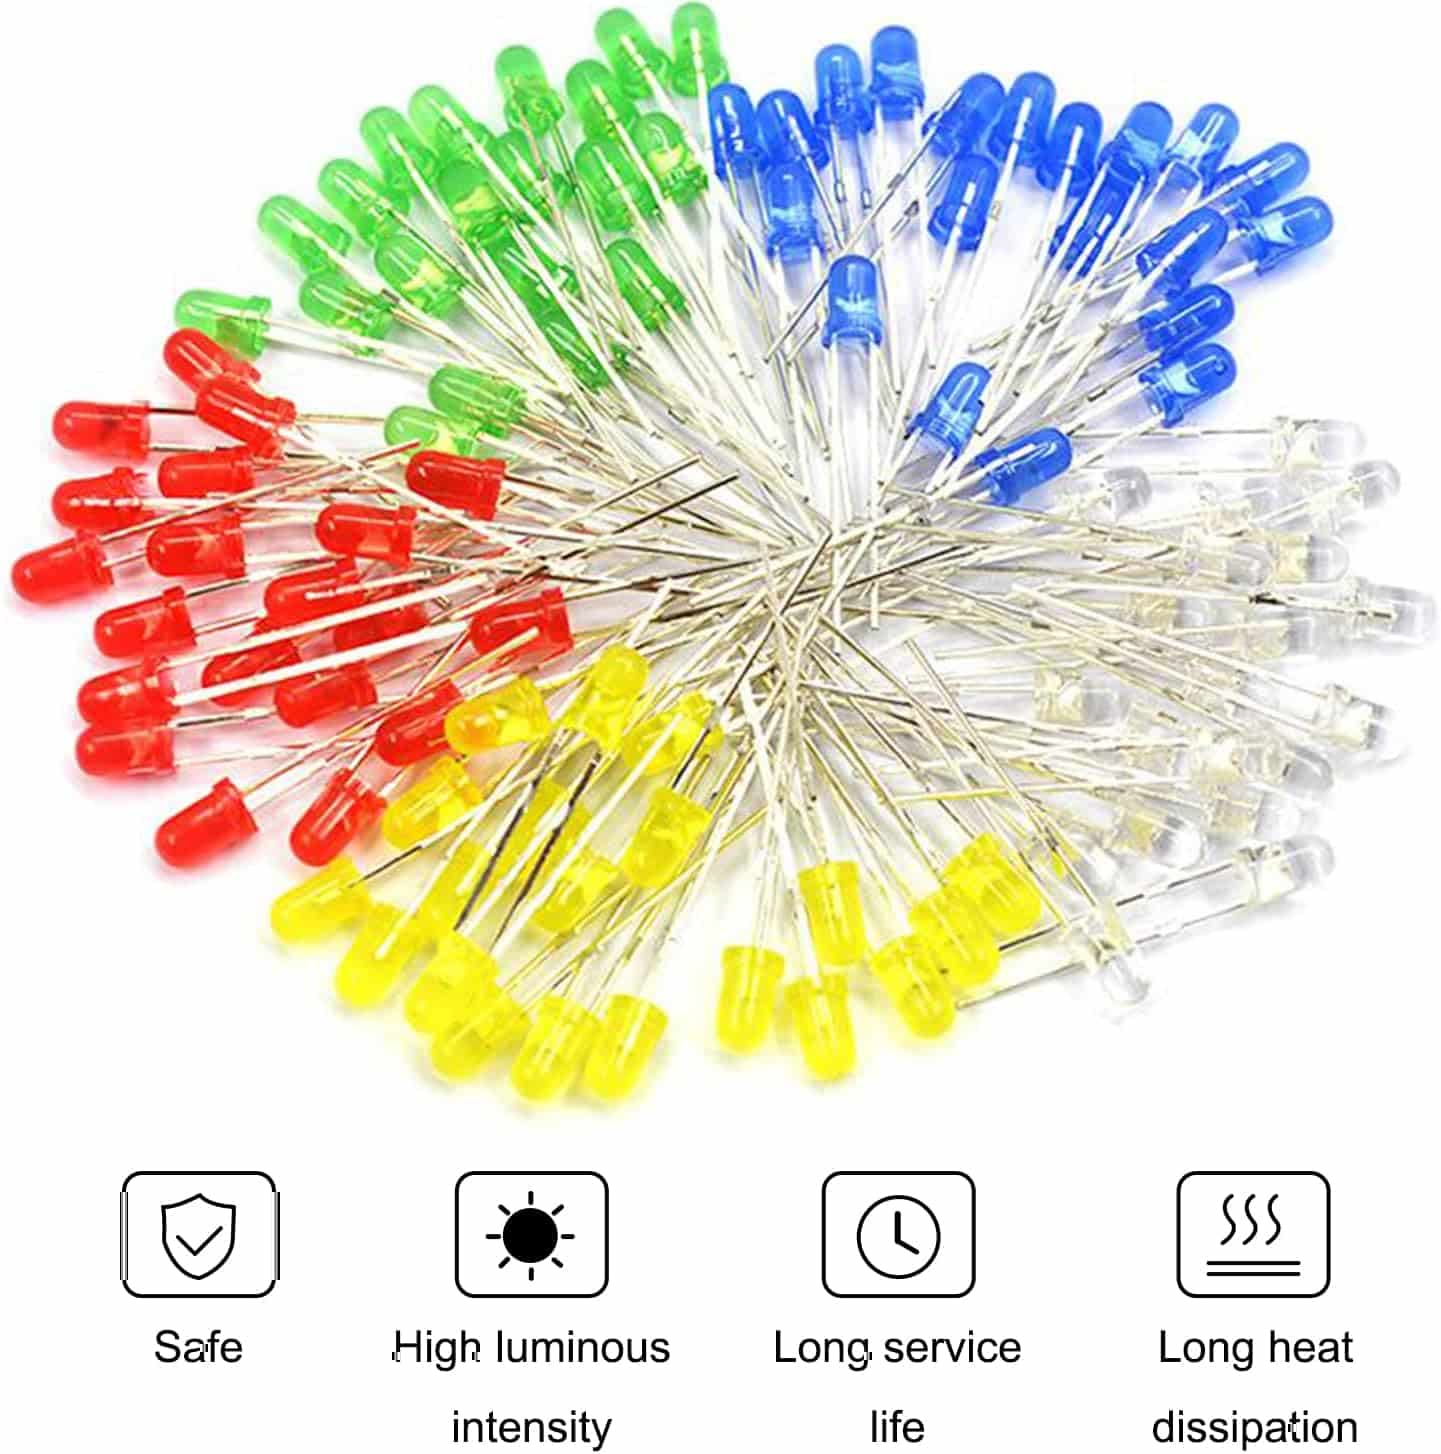 YUEONEWIN 500Pcs 5mm LED Diode Light Emitting Diode Assortment Kit Led Electronics Circuit Assorted Kit for Arduino, PCB Circuit DIY, Christmas Card Making (Multicolor-White/Red/Yellow/Blue/Green)